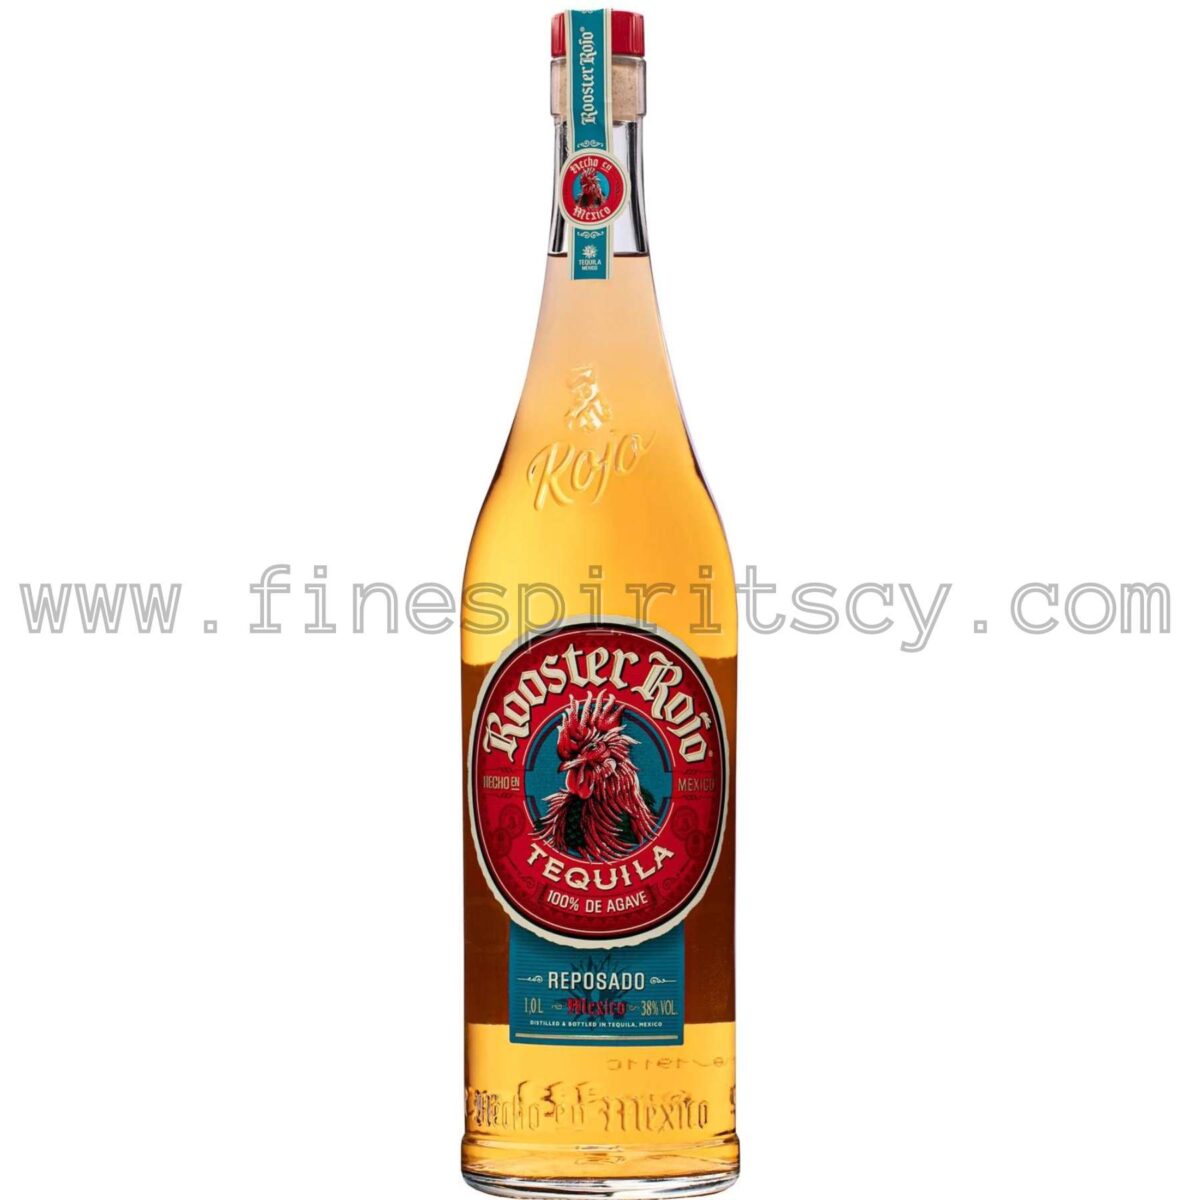 Rooster Rojo Reposado FSCY 1L Tequila 100cl 1000ml Liter Litre Cyprus Mexican Price